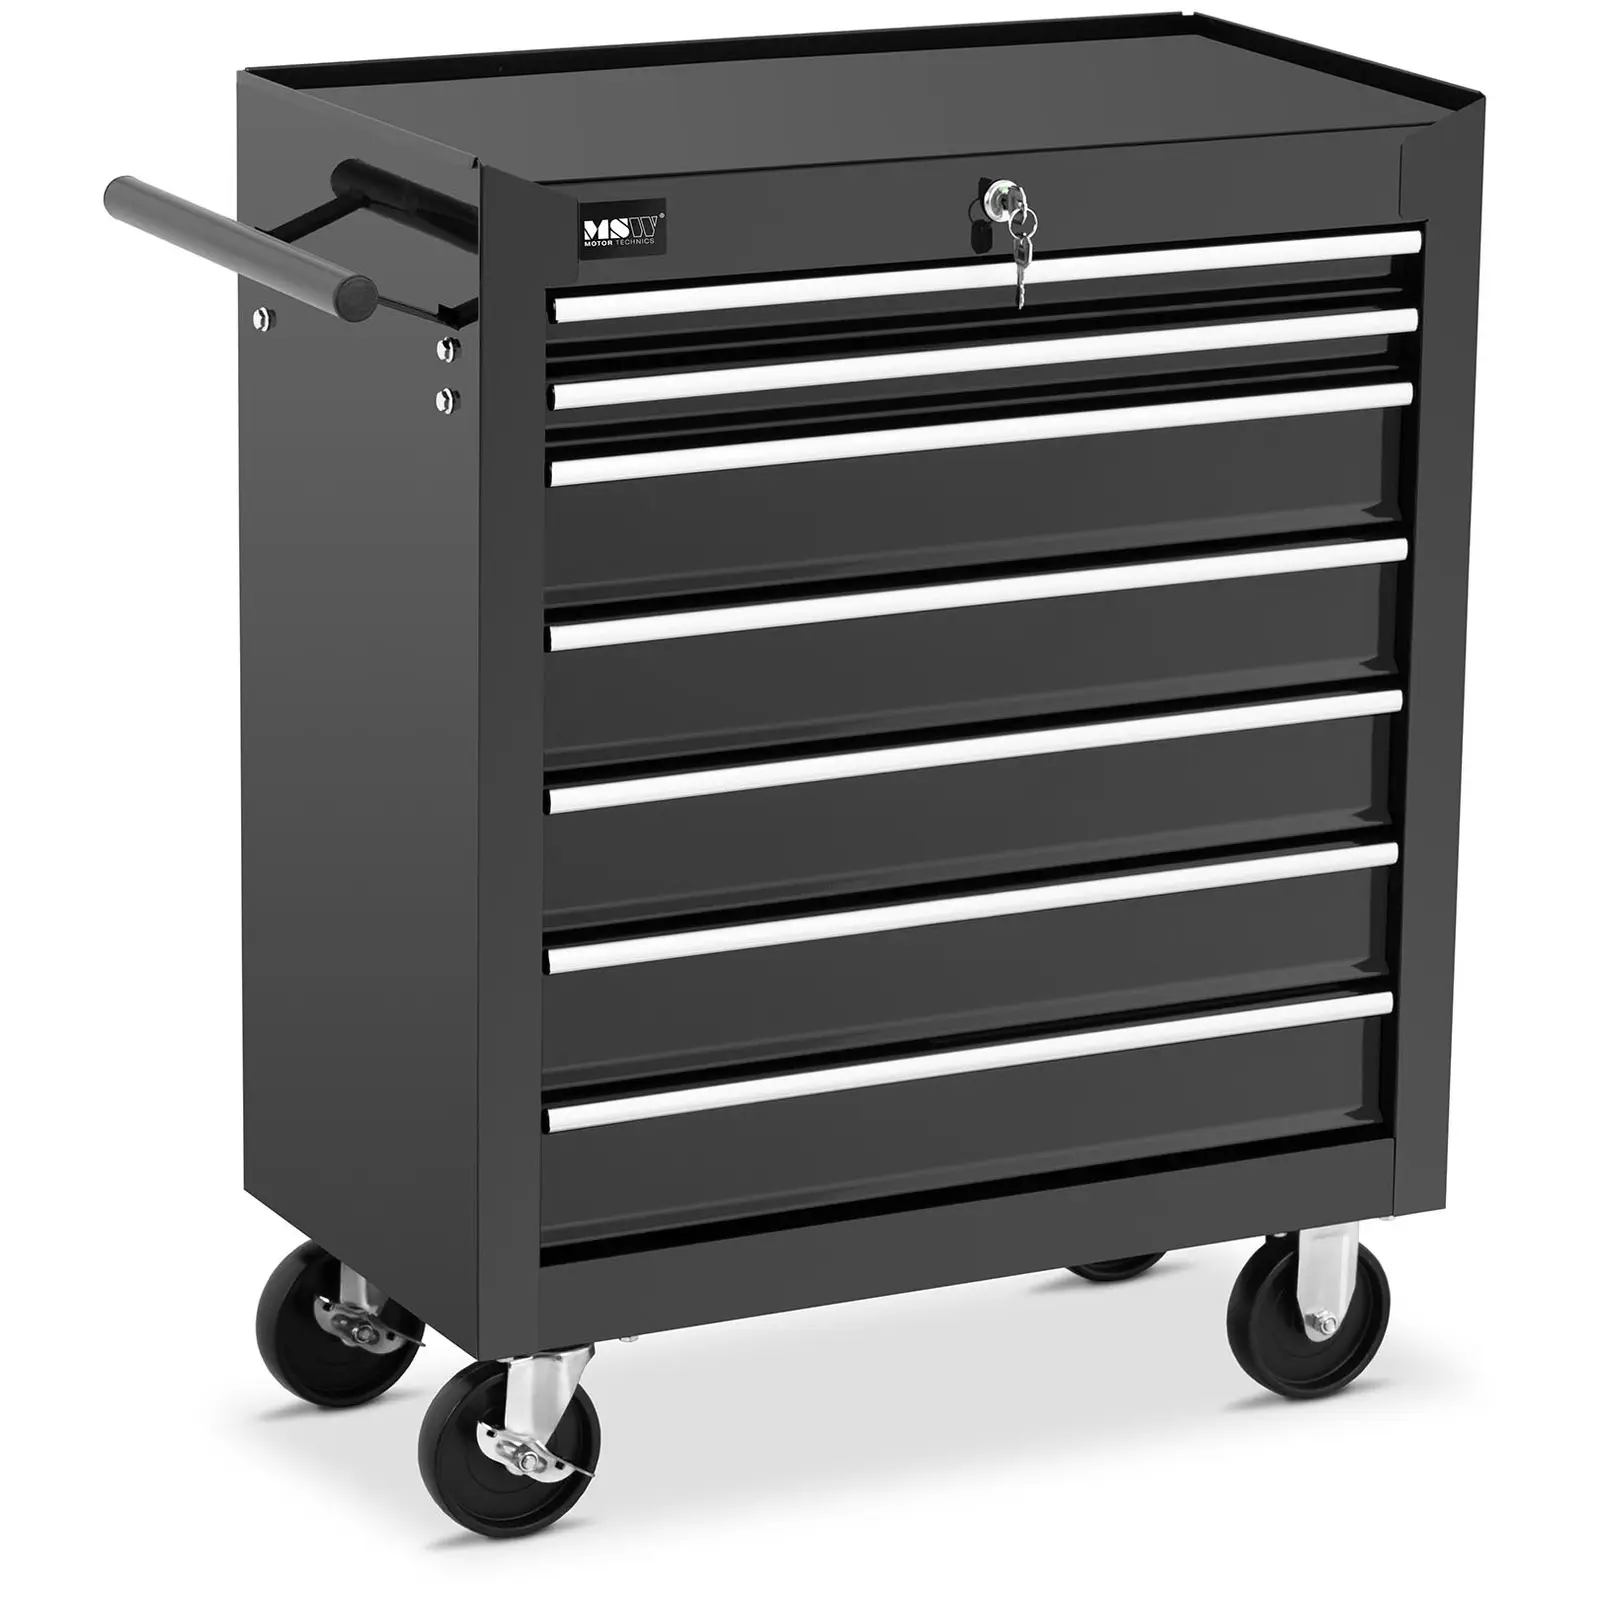 Tool Trolley - 7 drawers - up to 60 kg - lockable